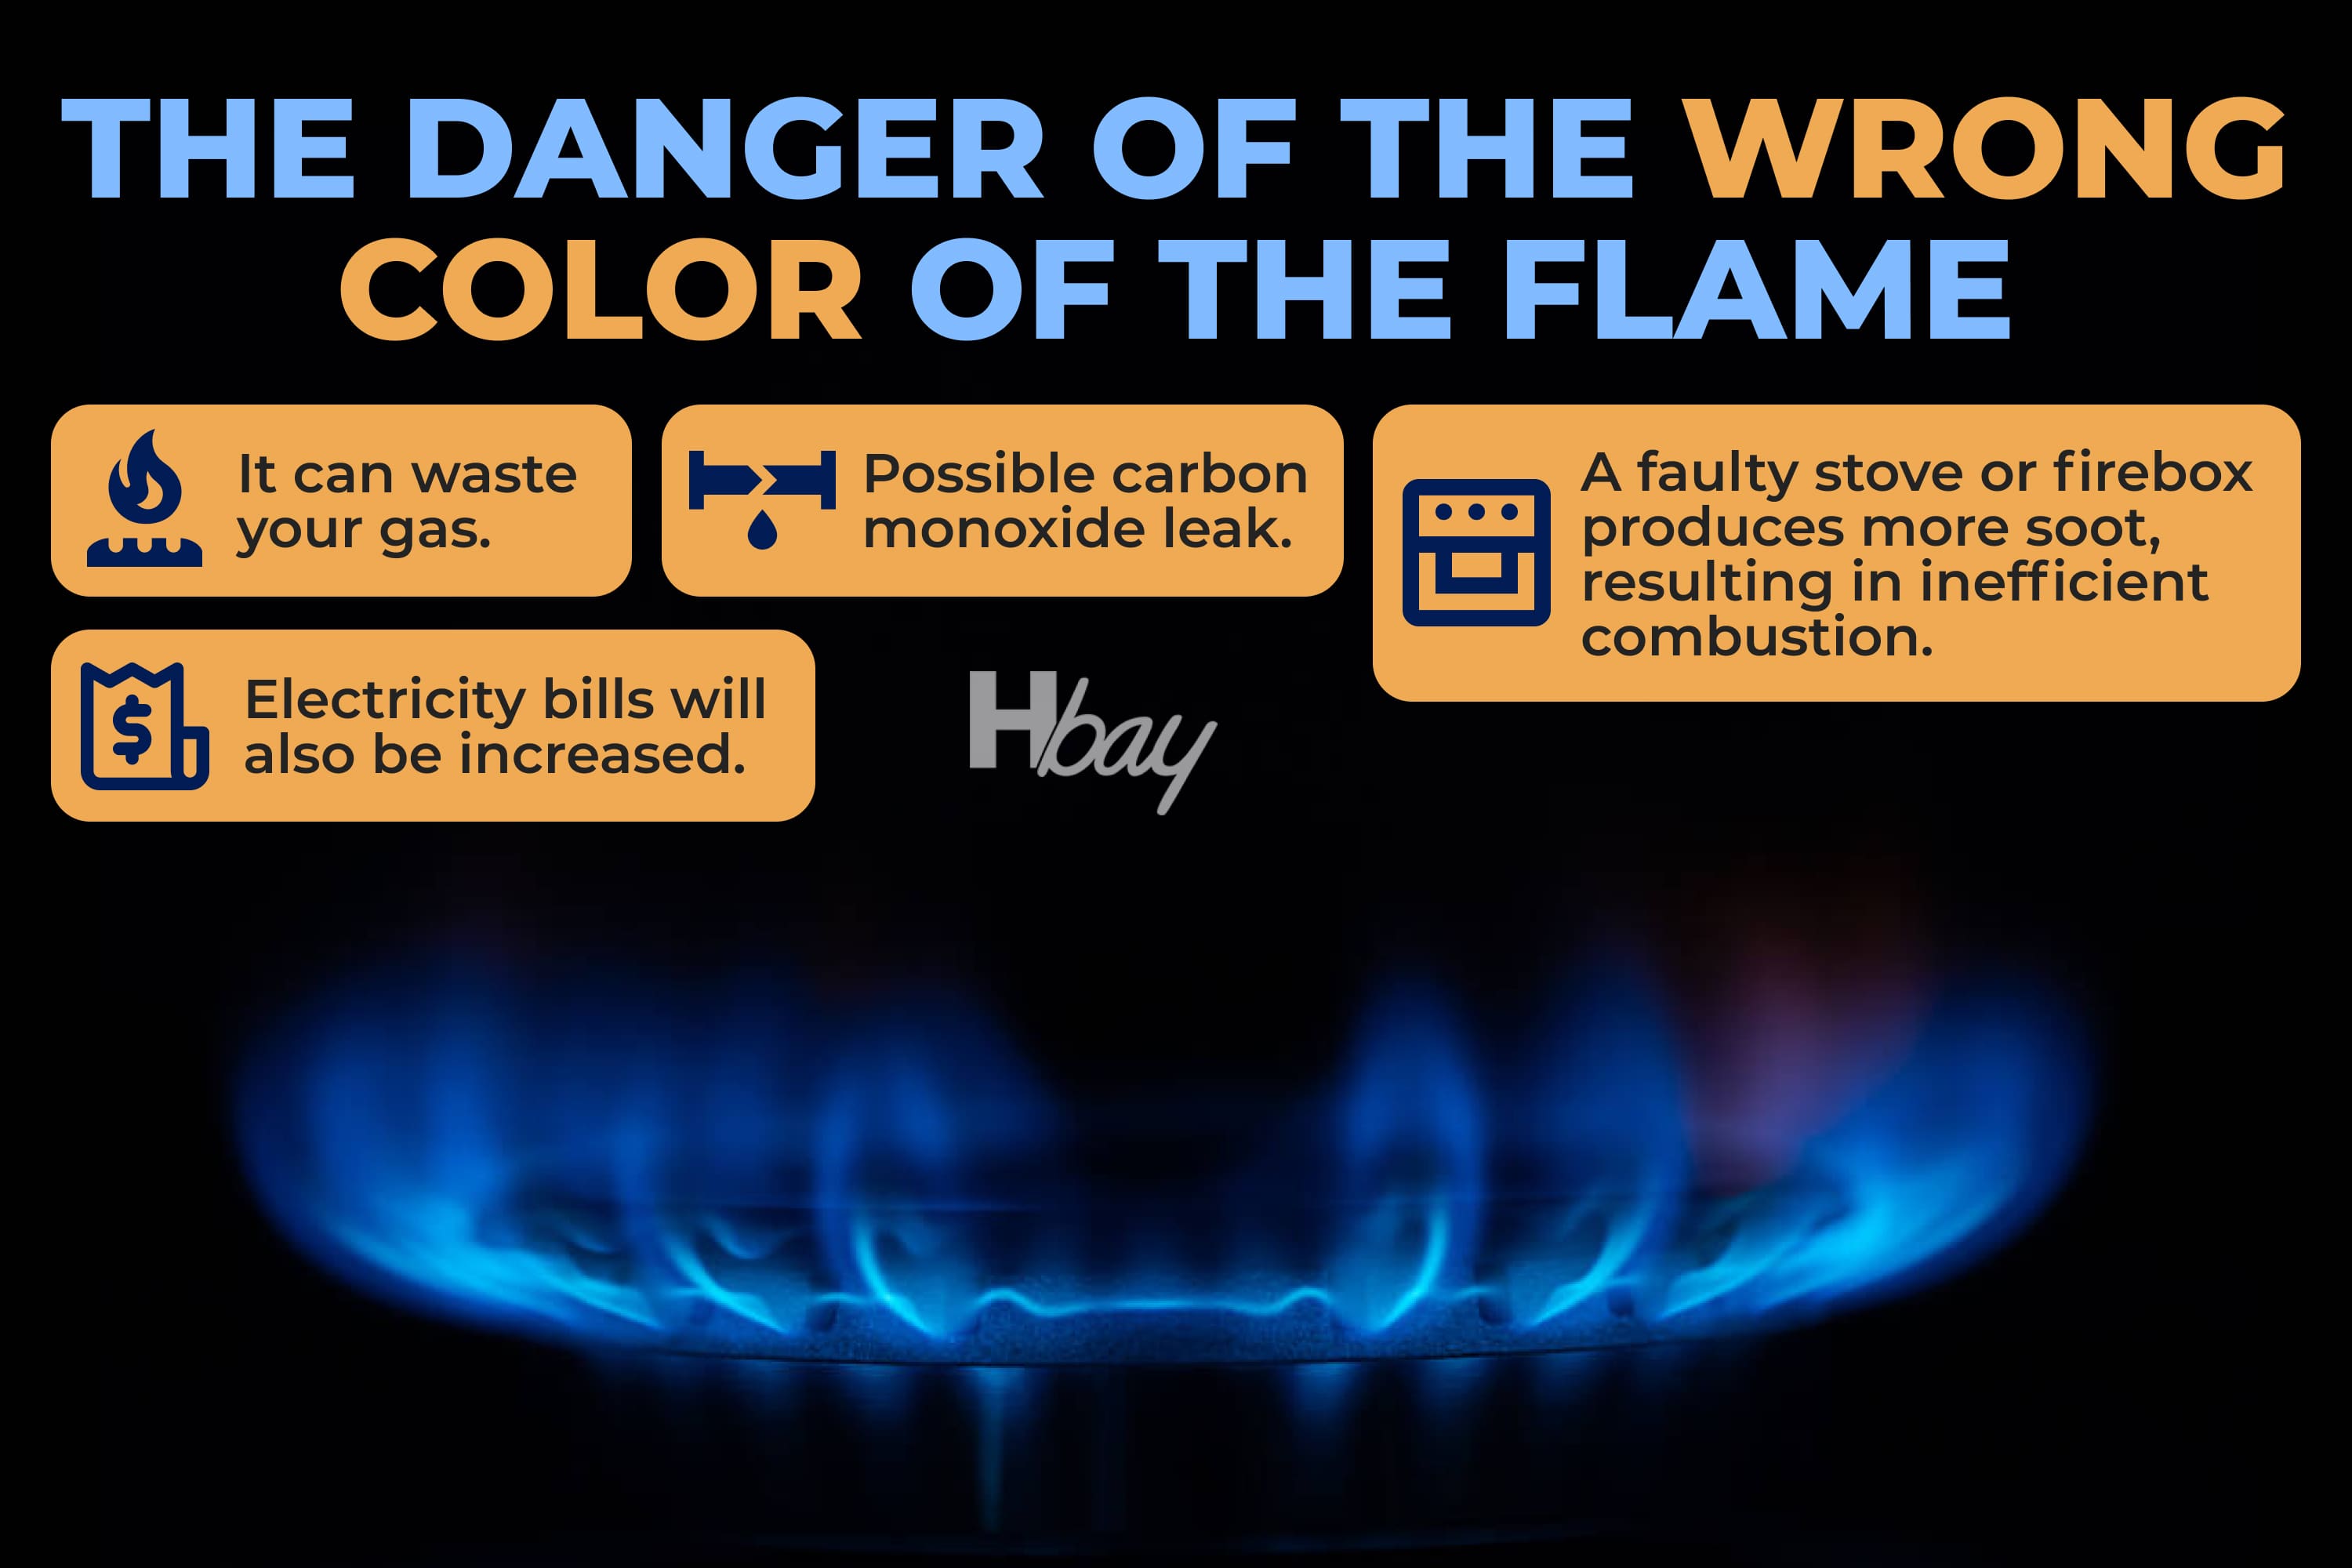 The danger of the wrong color of the flame